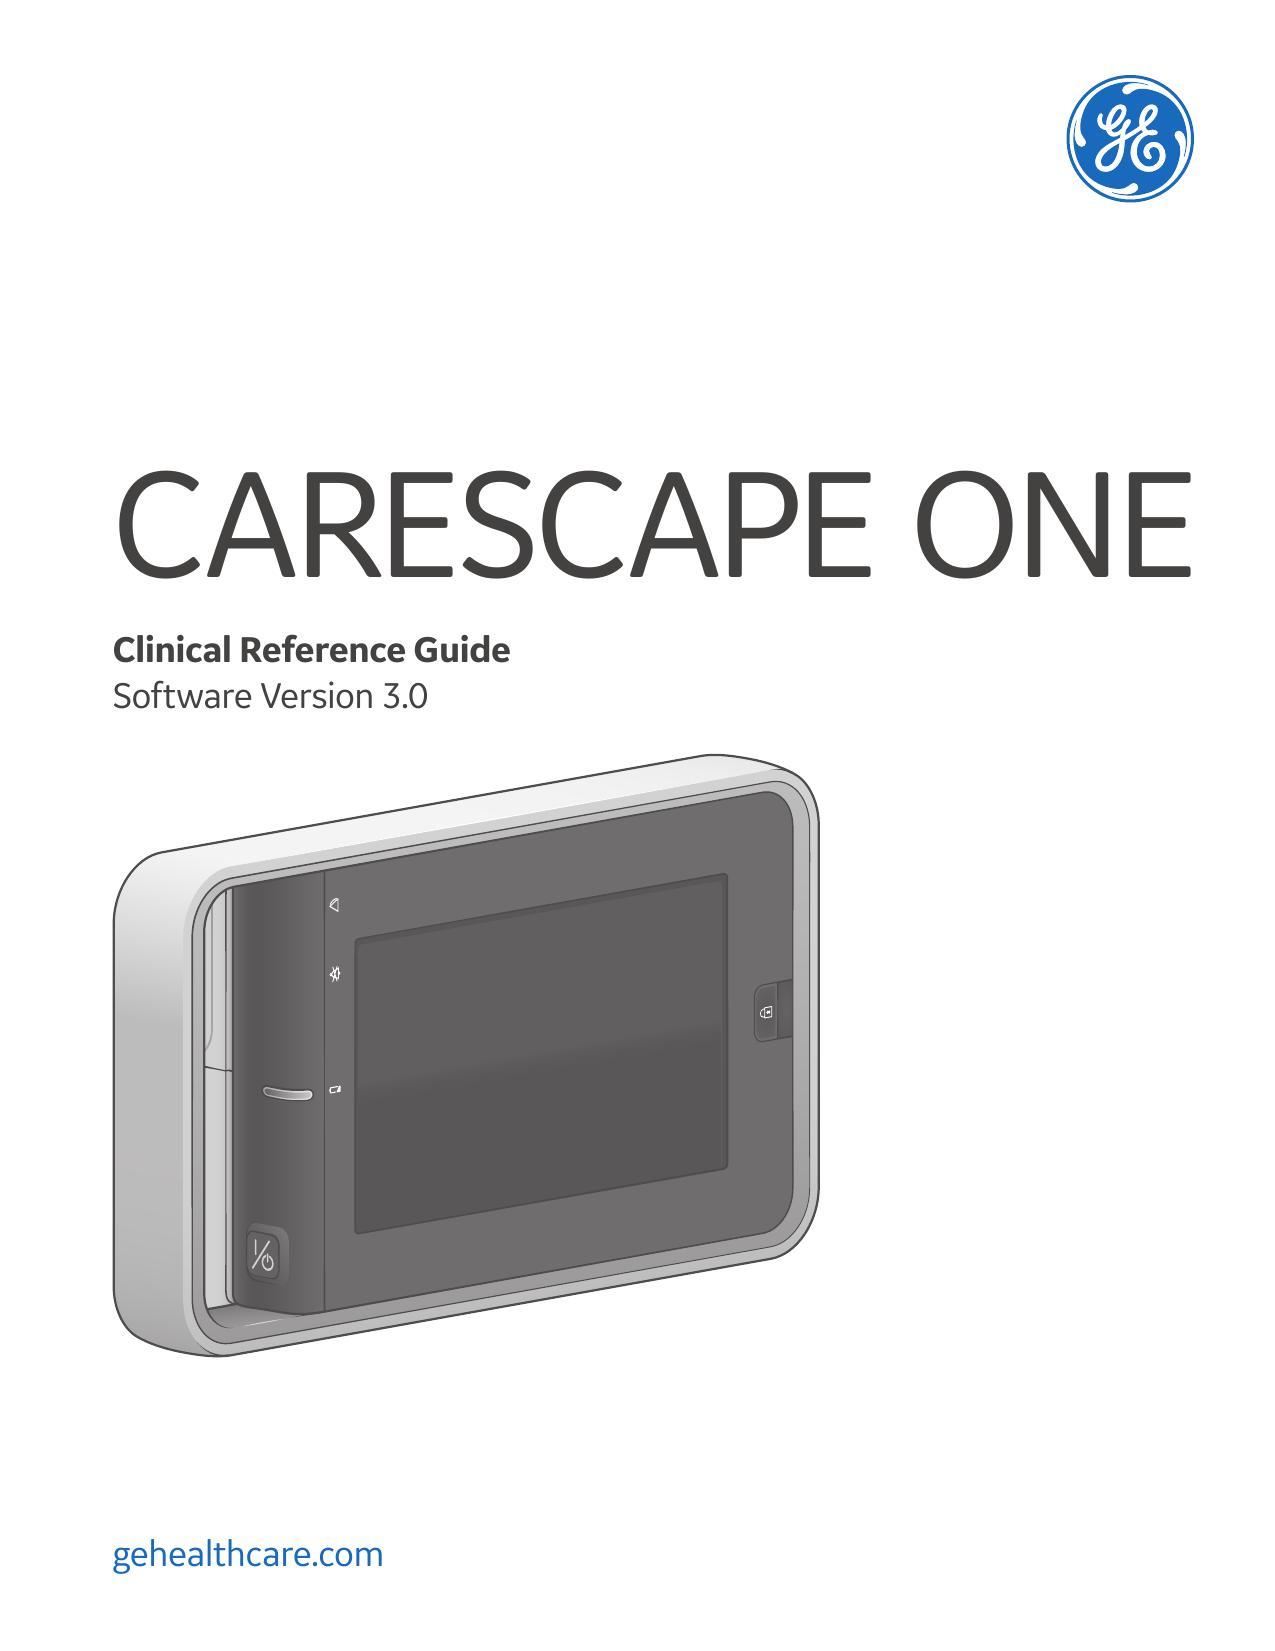 carescape-one-clinical-reference-guide-software-version-30.pdf